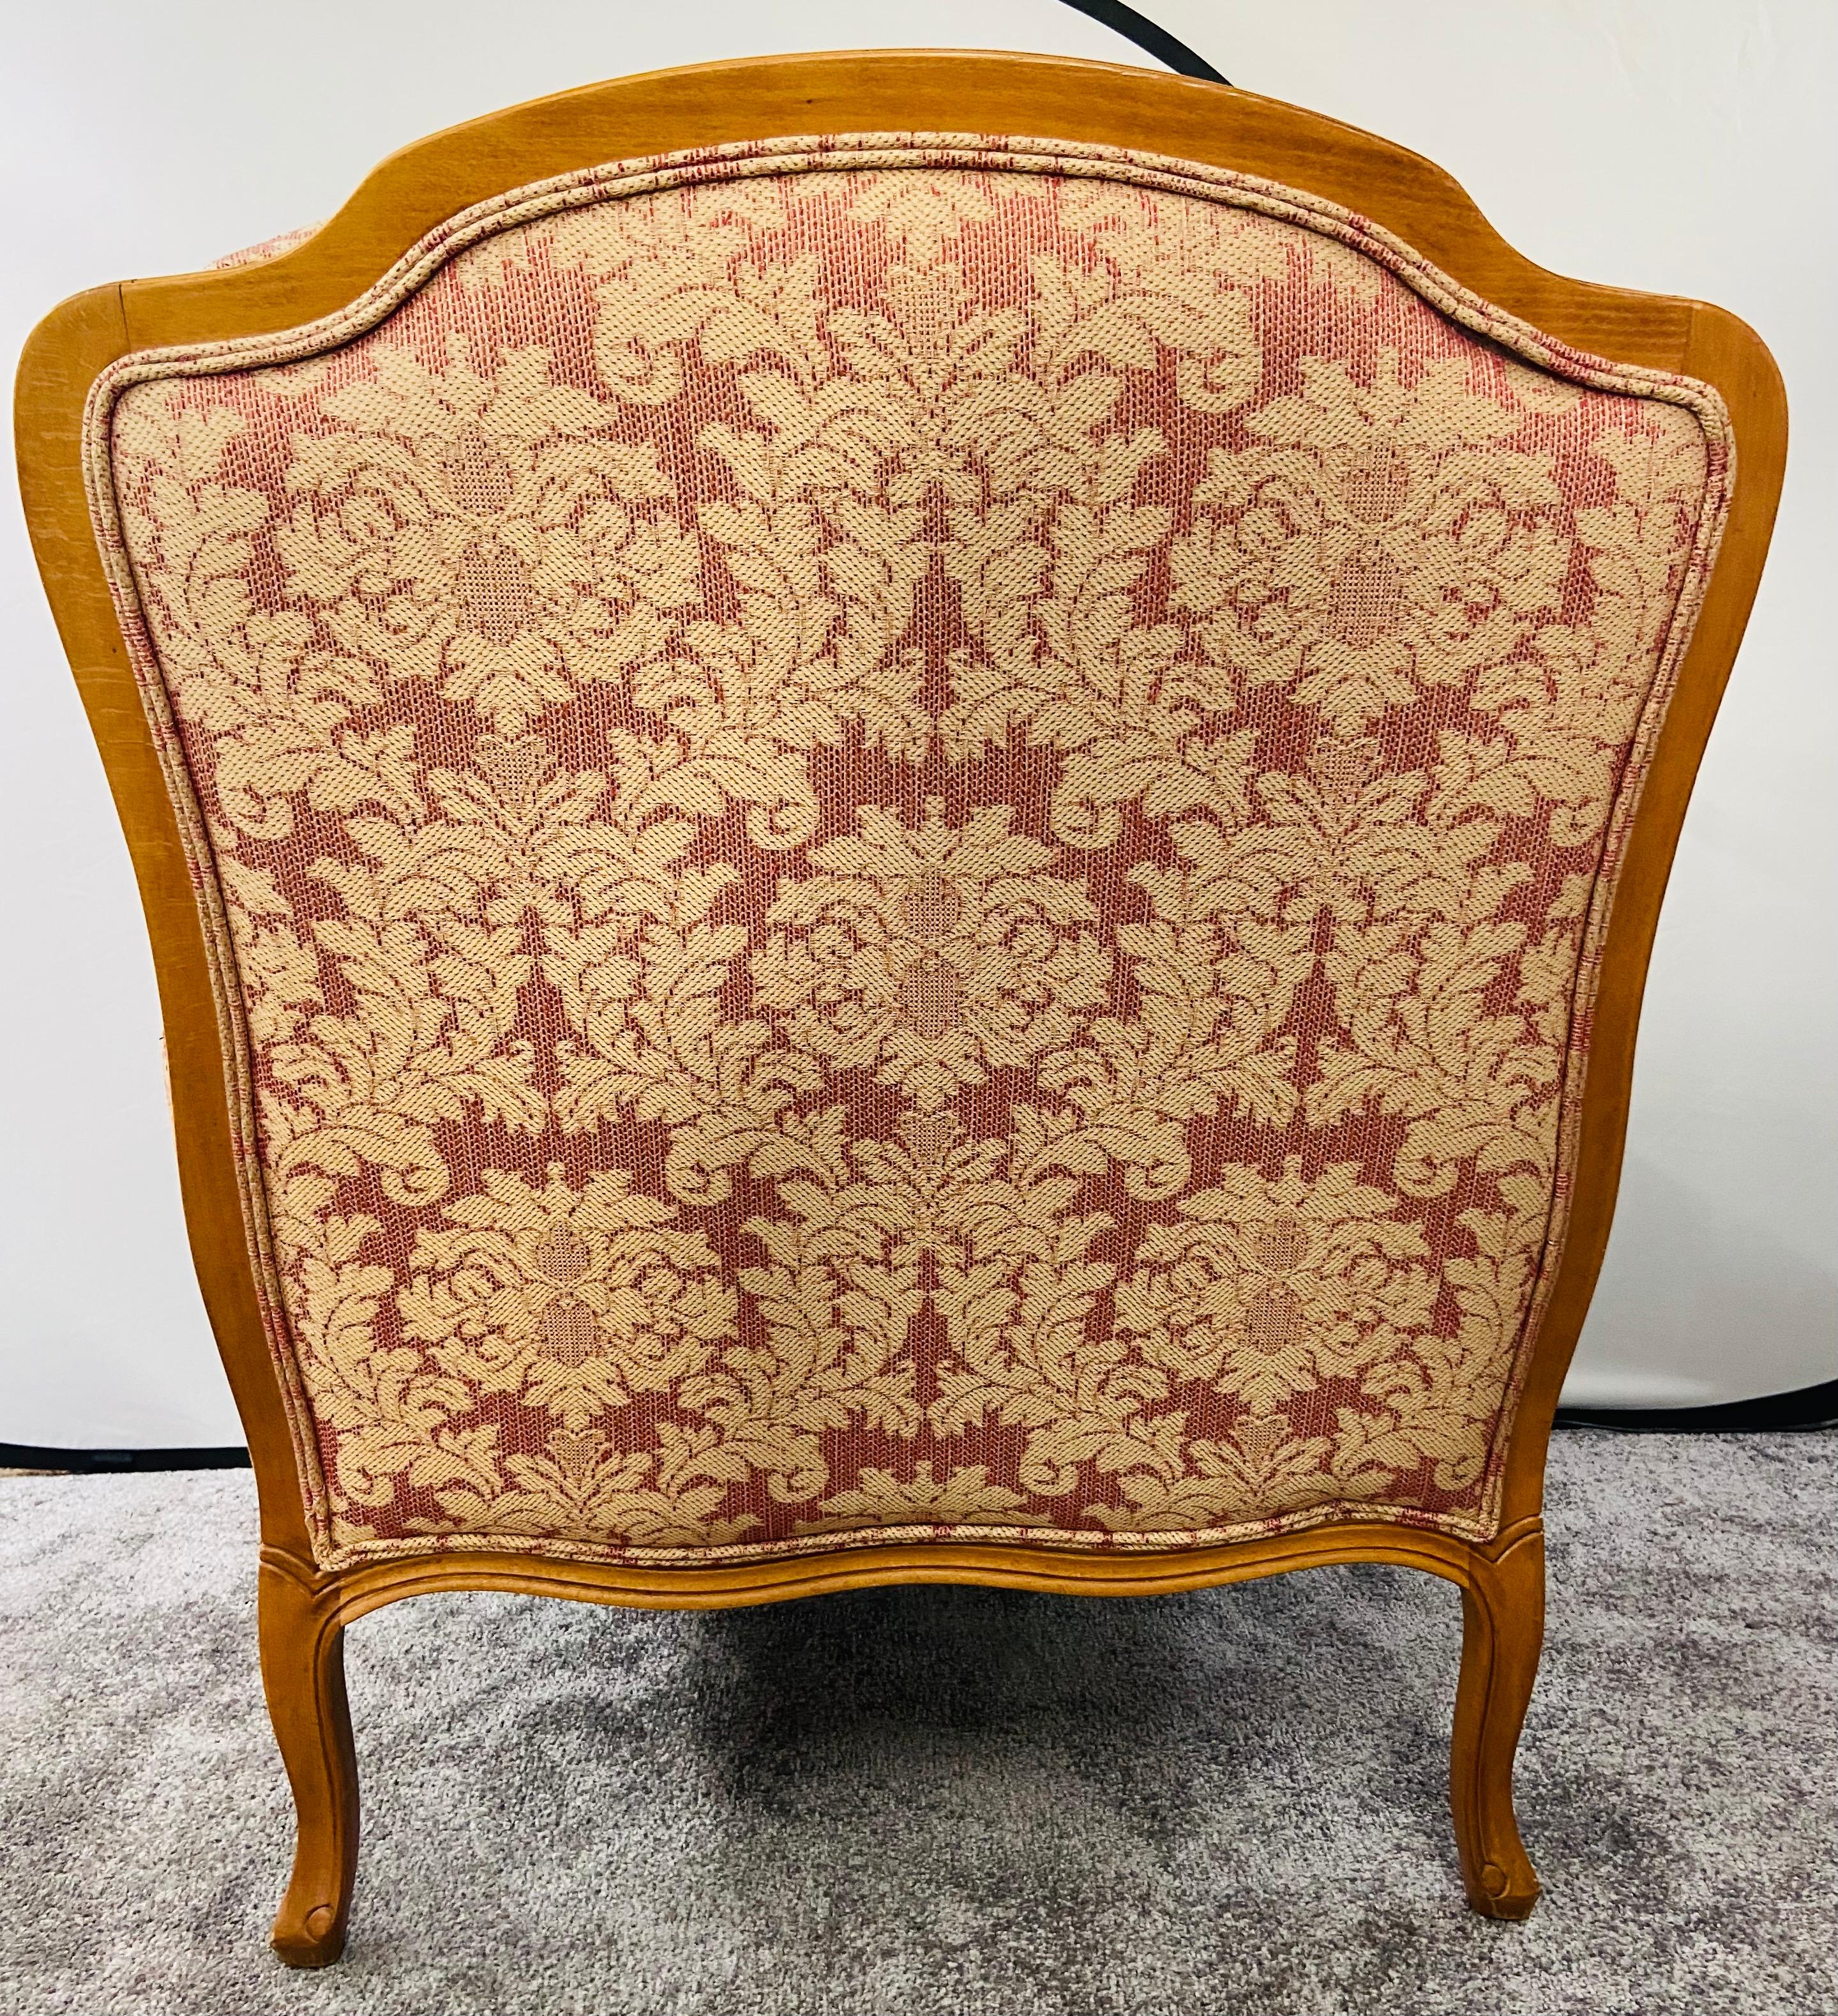 20th Century French Louis XV Style Bergere Armchair or Chair and Ottoman by Ethan Allen